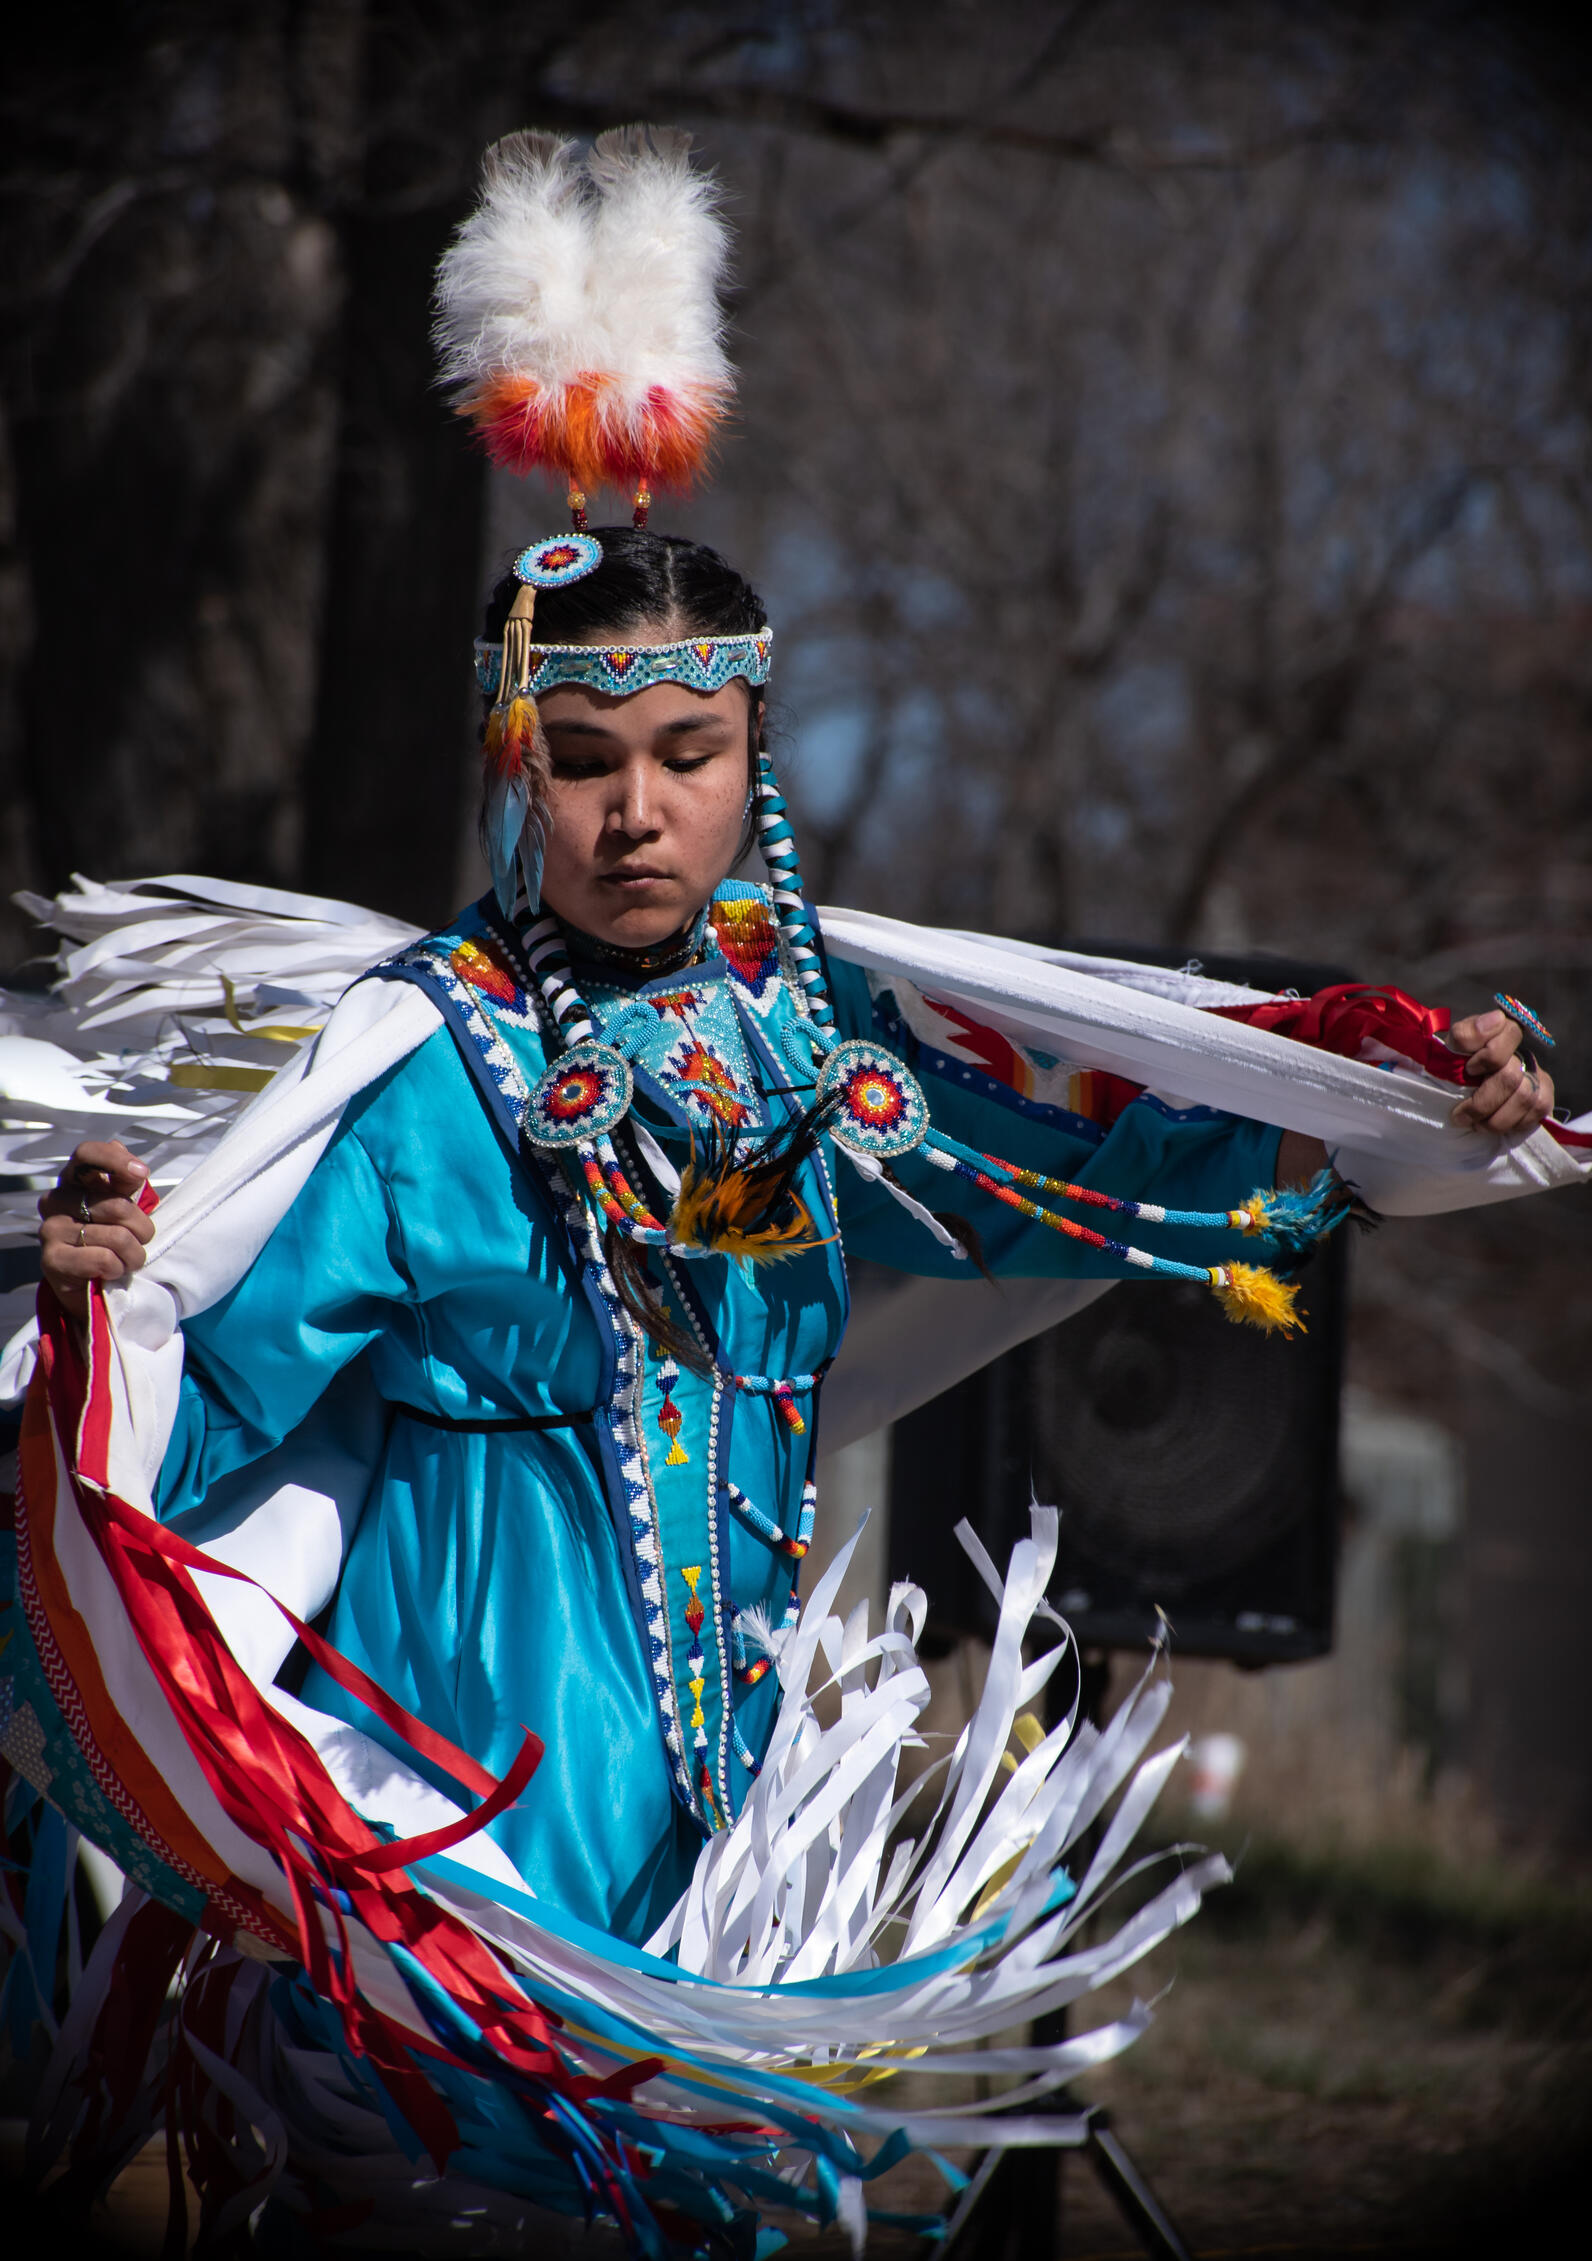 Marysa Dominguez performed ceremonial dances with the Many Moccasins Dance Troupe.